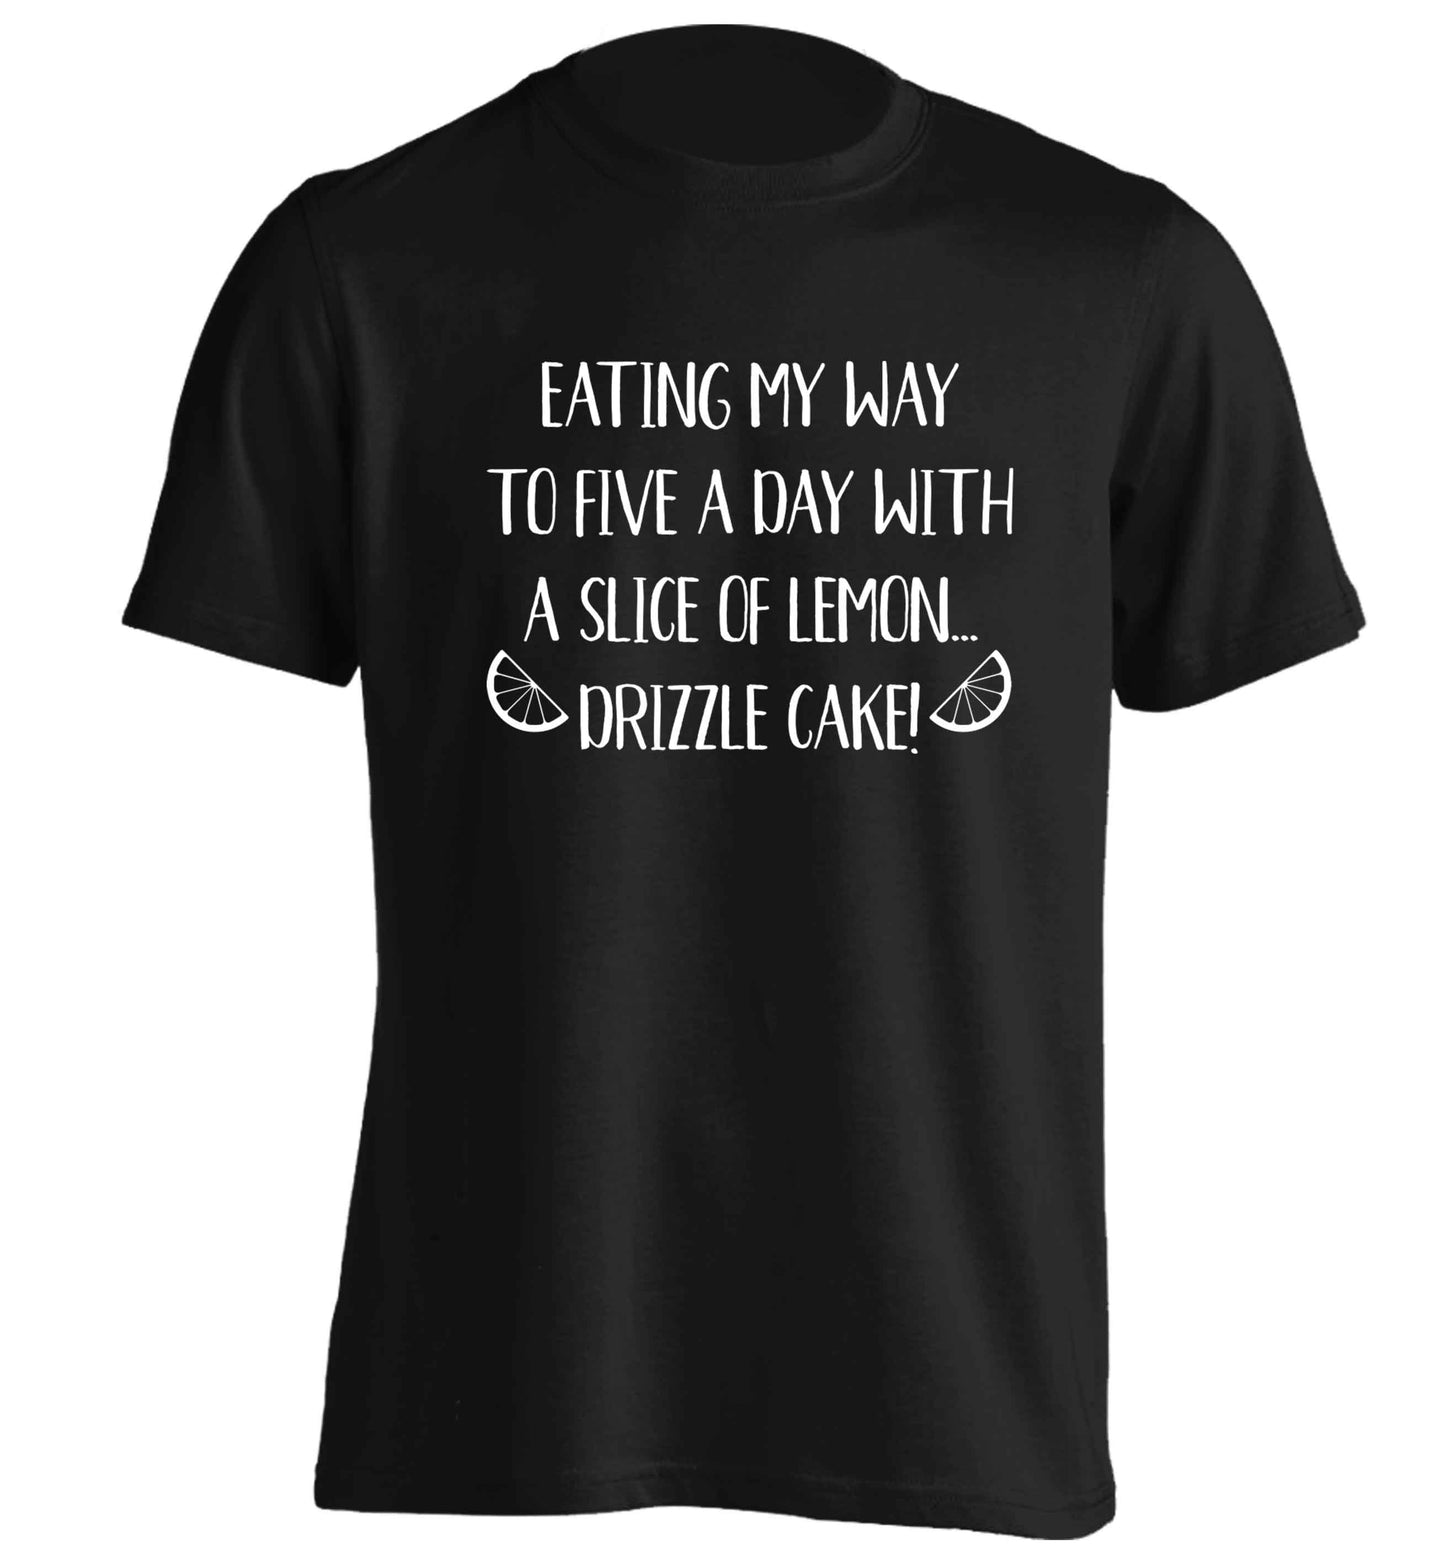 Eating my way to five a day with a slice of lemon drizzle cake day adults unisex black Tshirt 2XL